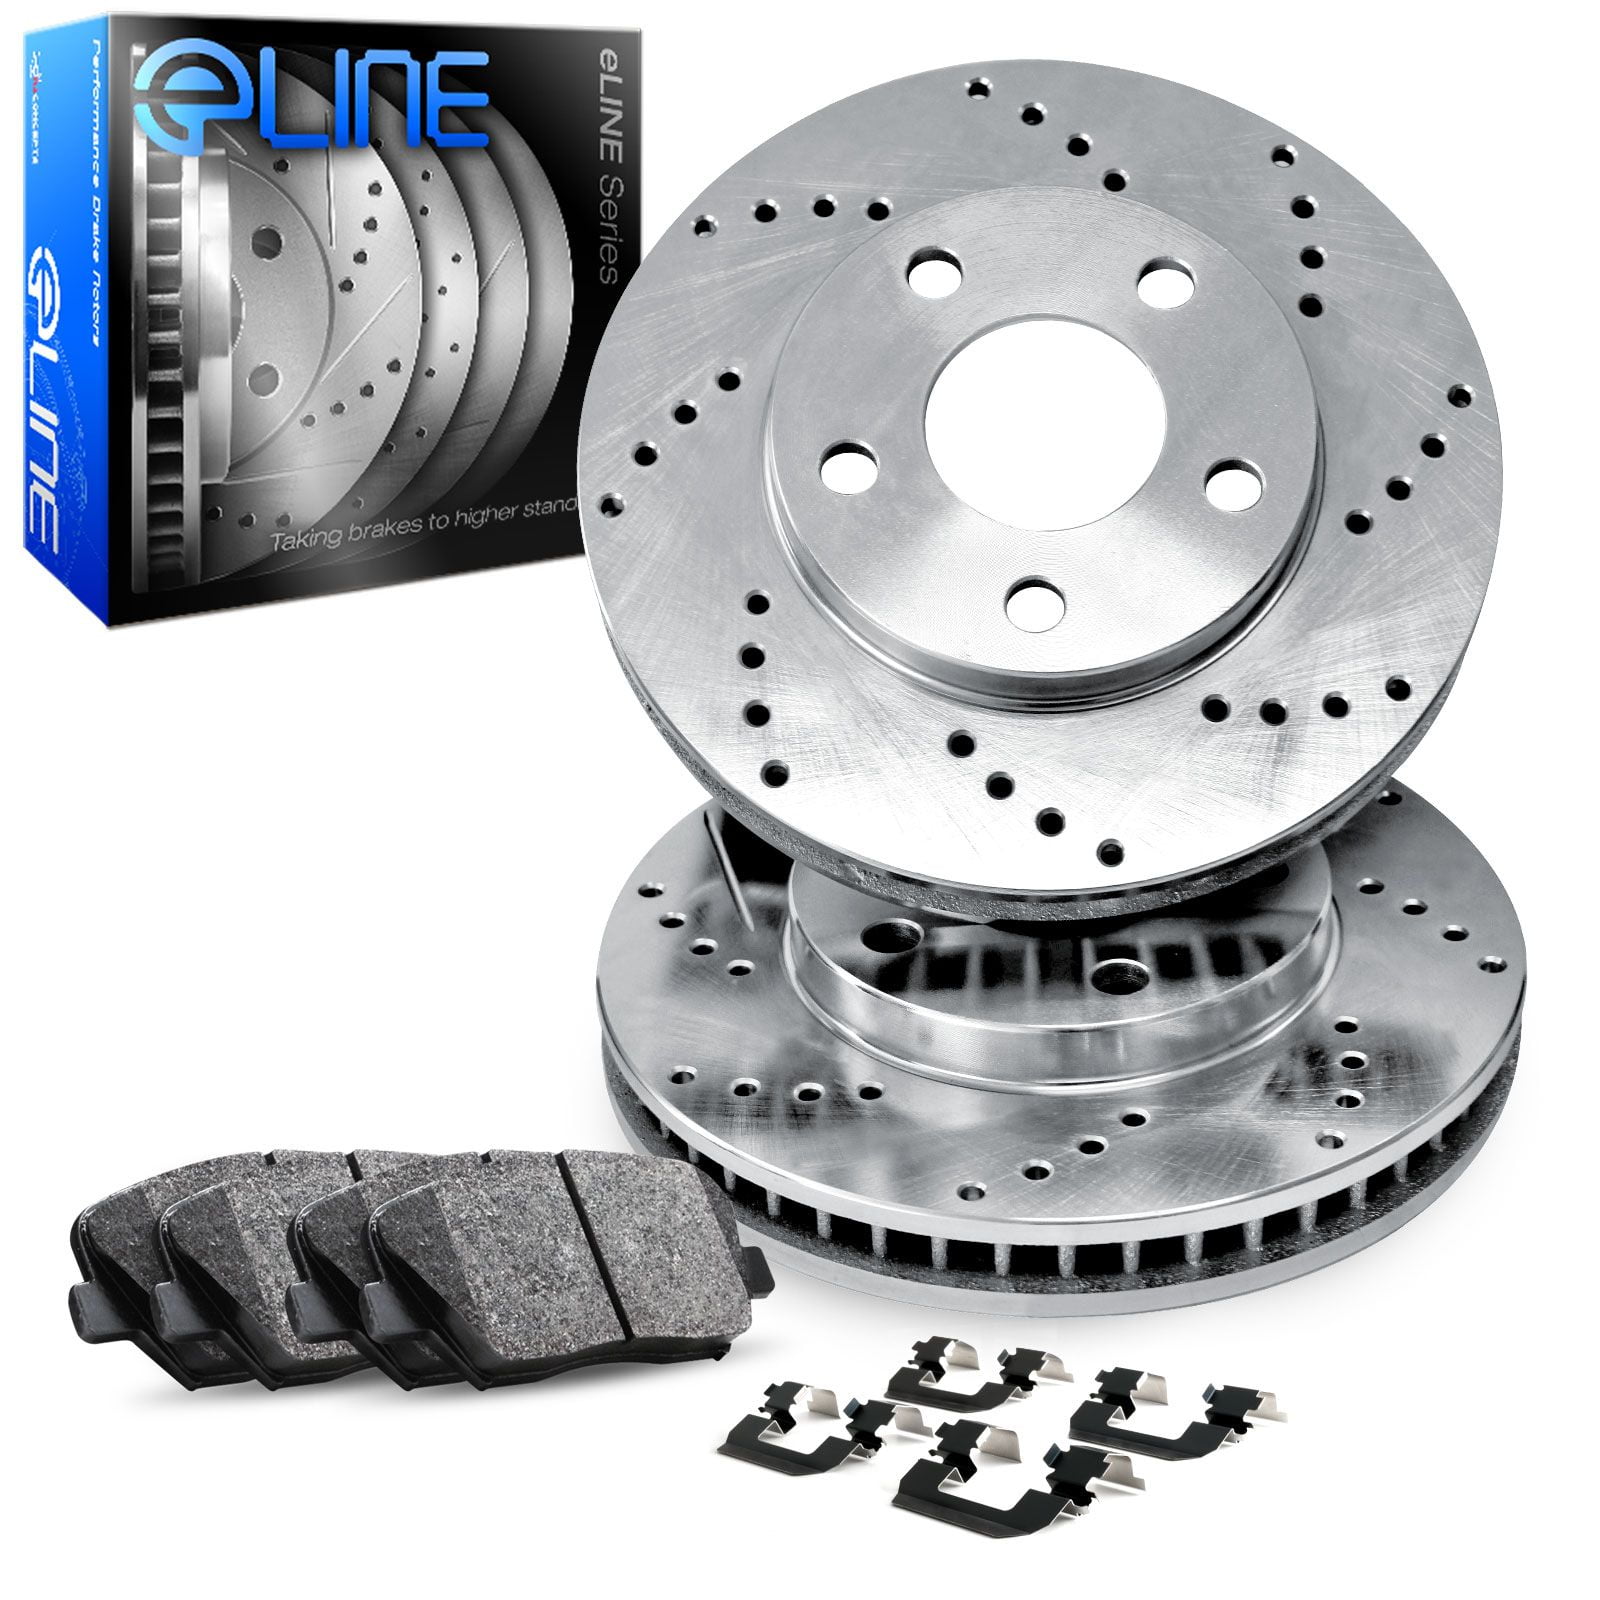 For INFINITI I35 NISSAN ALTIMA MAXIMA Front OE Brake Calipers and Rotors Pads